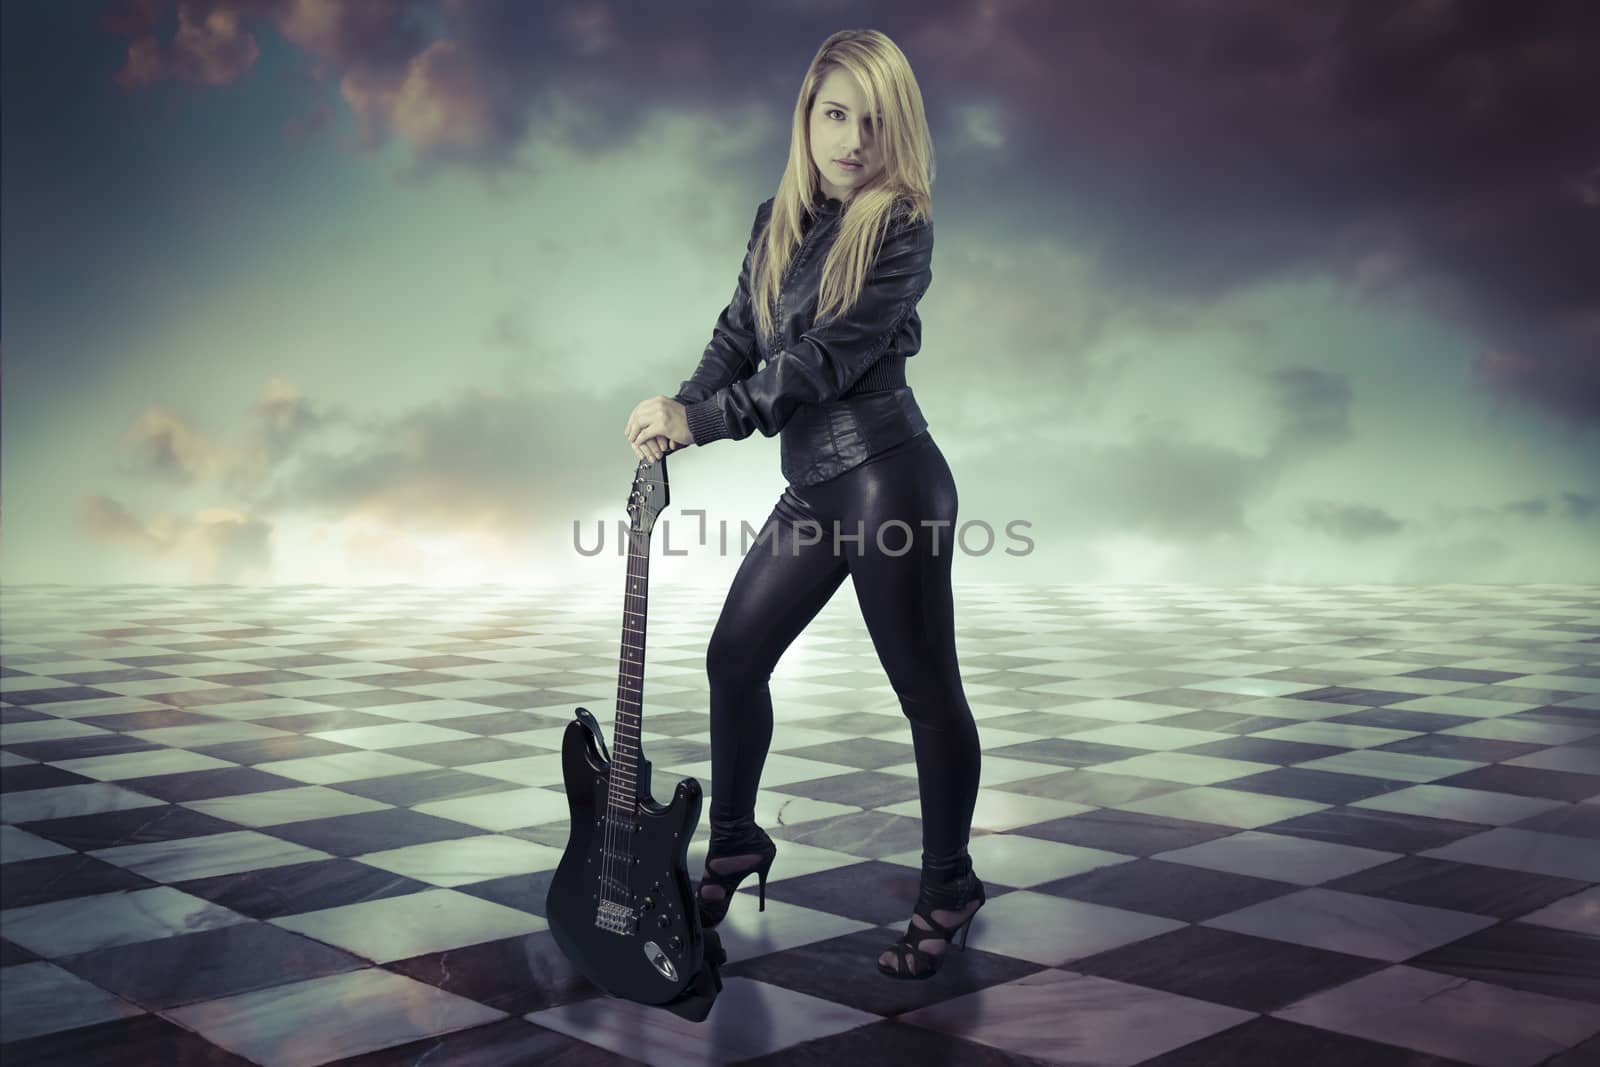 Young girl with black electric guitar.gamero chess, pieces marble floor